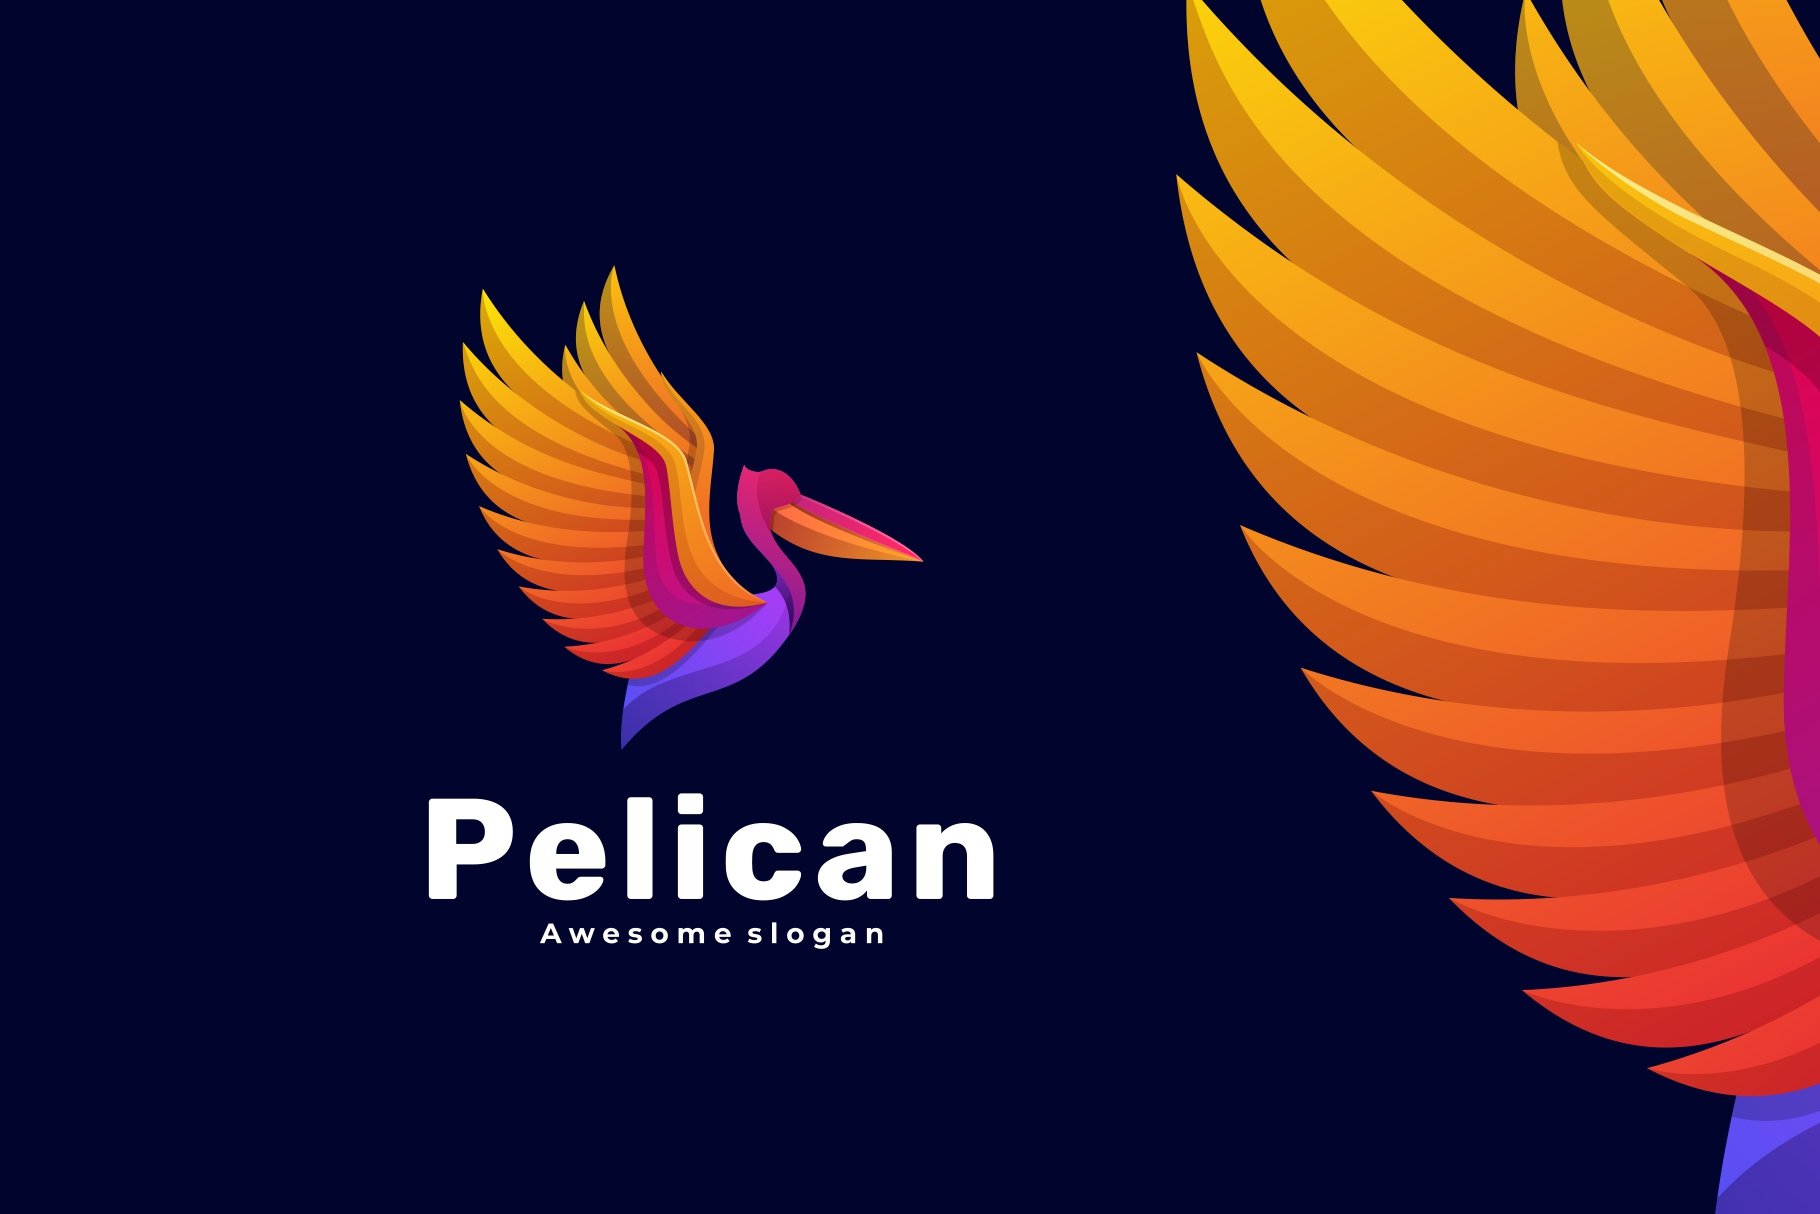 Pelican Colorful Logo cover image.